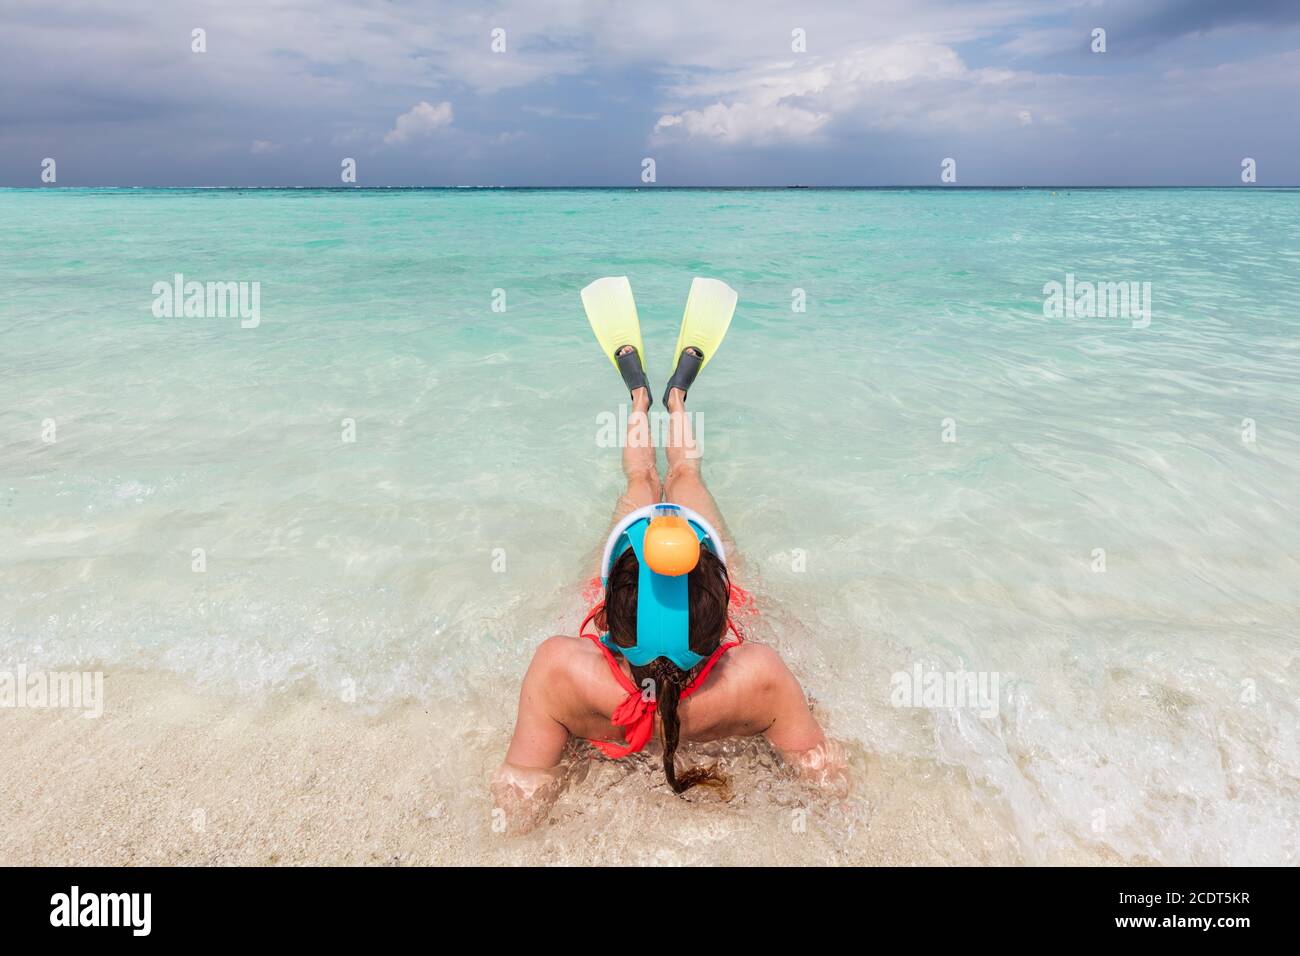 Woman wearing snorkeling mask and fins ready to snorkel in the ocean, Maldives. Stock Photo